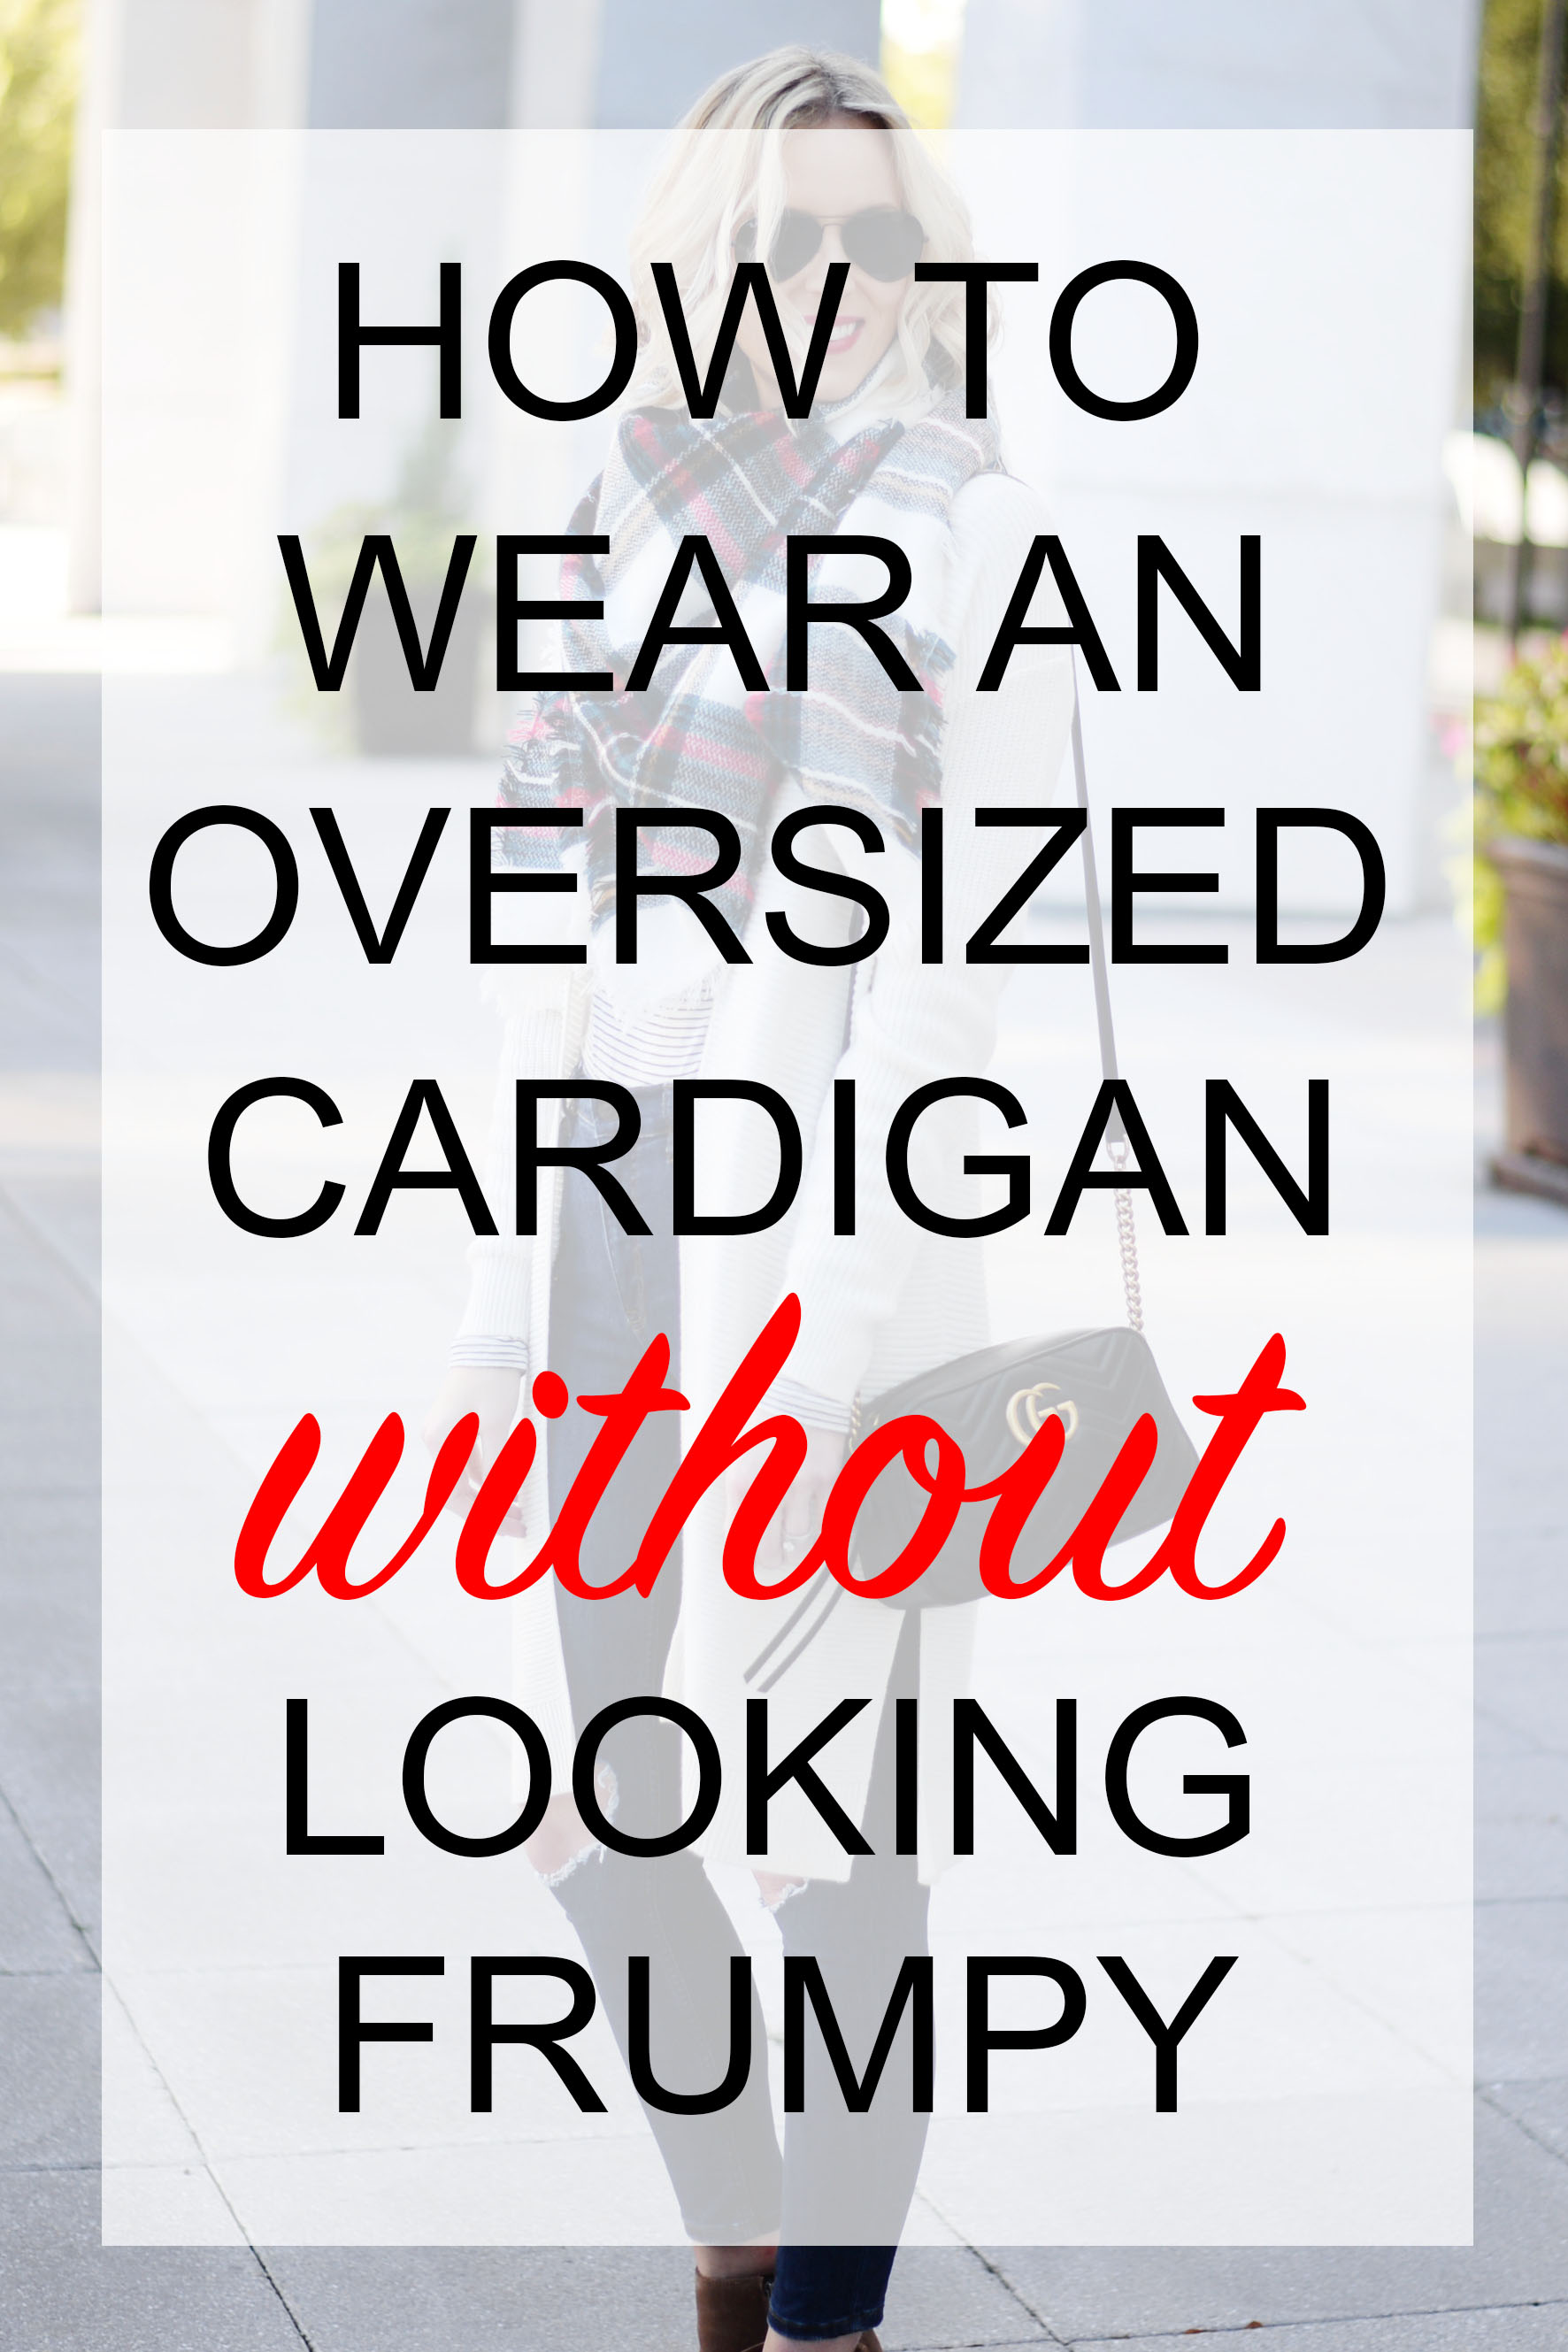 How to Wear Cardigans Without Looking Frumpy